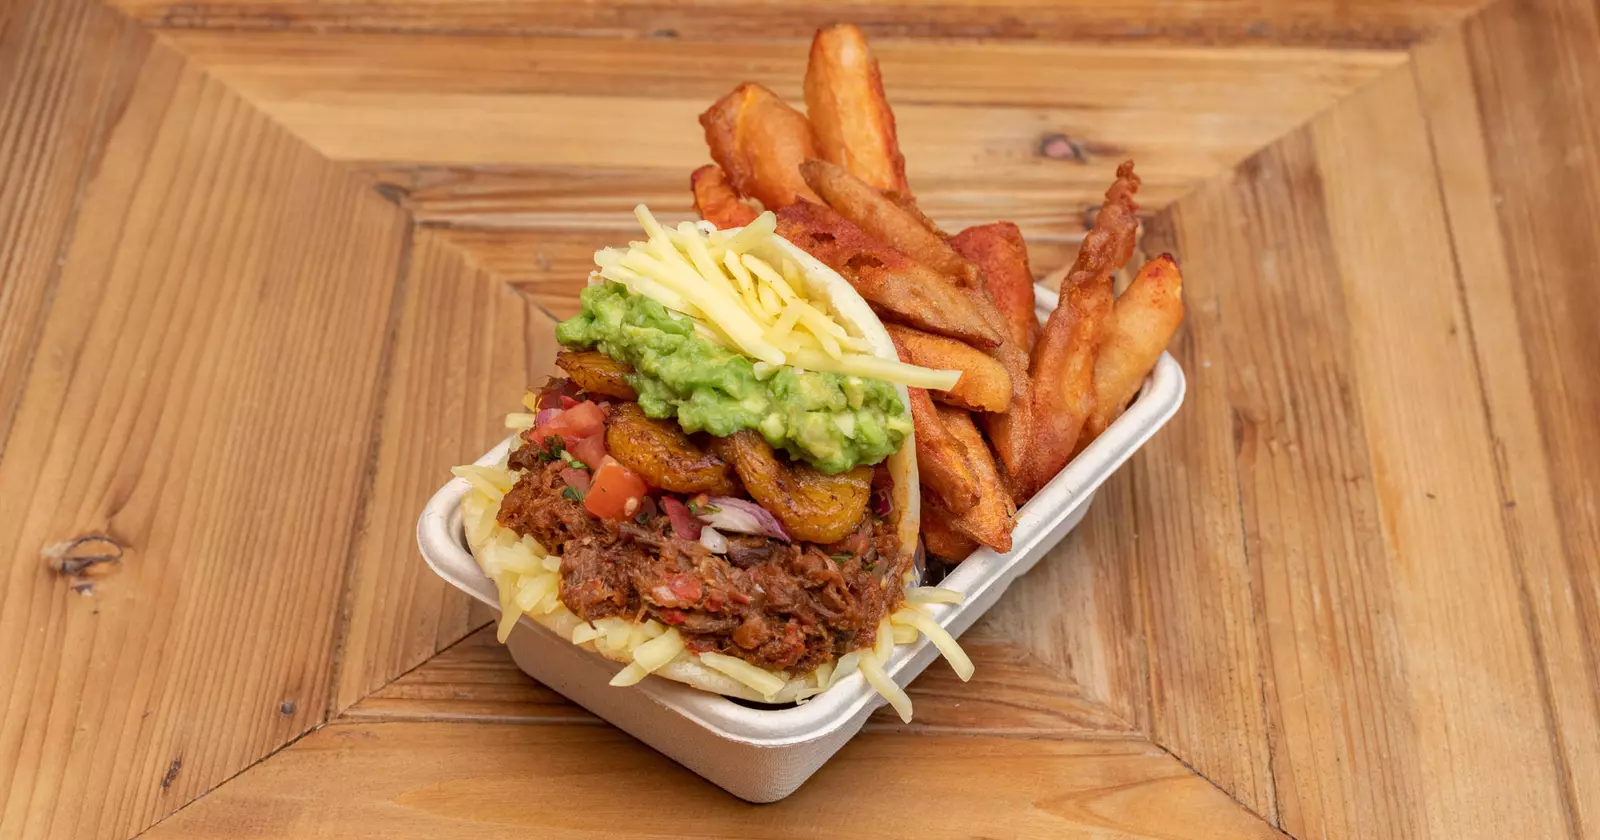 A stacked flatbread containing layers of meat, tomatoes, grilled vegetables, guacamole and cheese sits in a takeaway box next to crispy fries